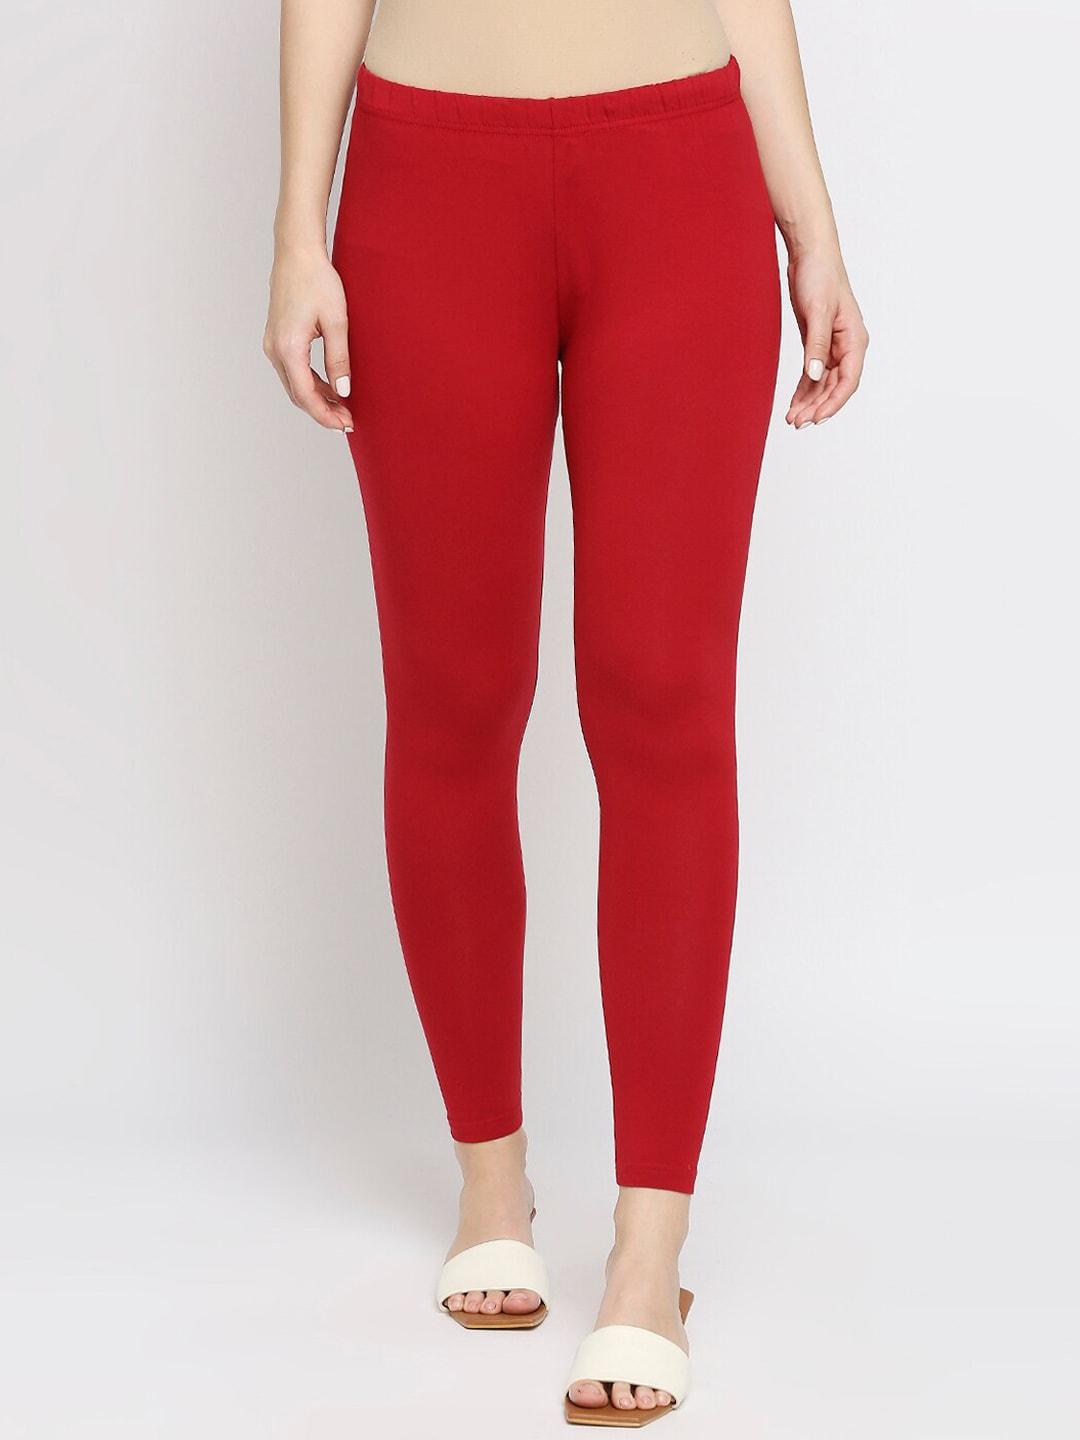 ethnicity women red solid ankle length leggings